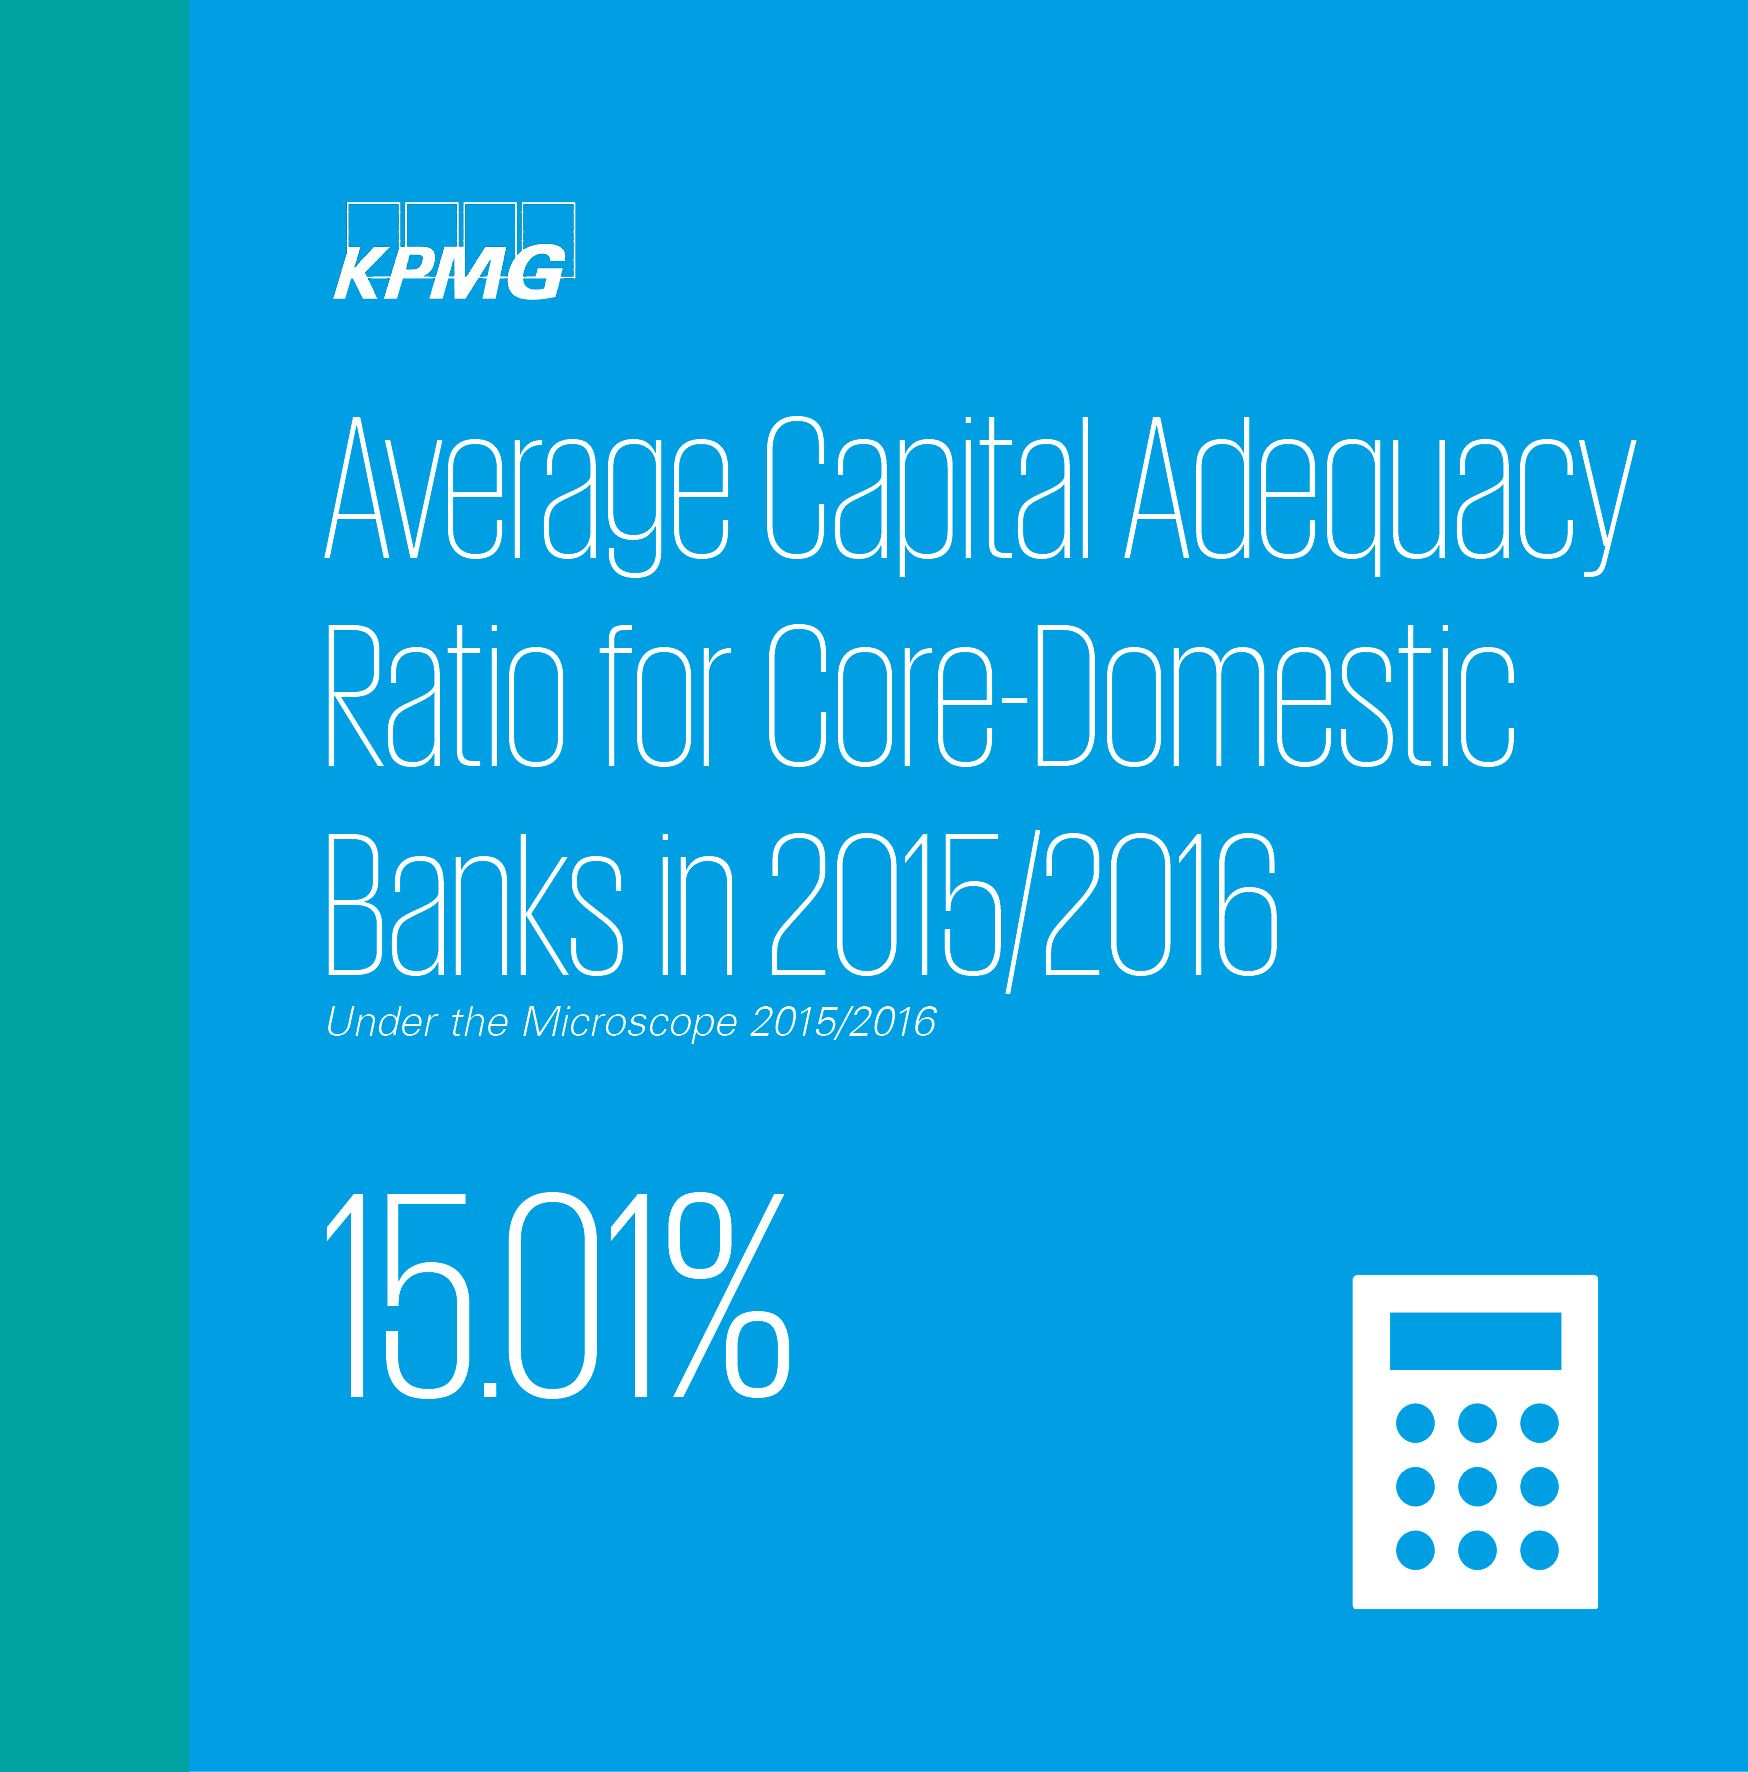 Average Capital Adequacy Ratio for Core-Domestic Banks in 2015/2016